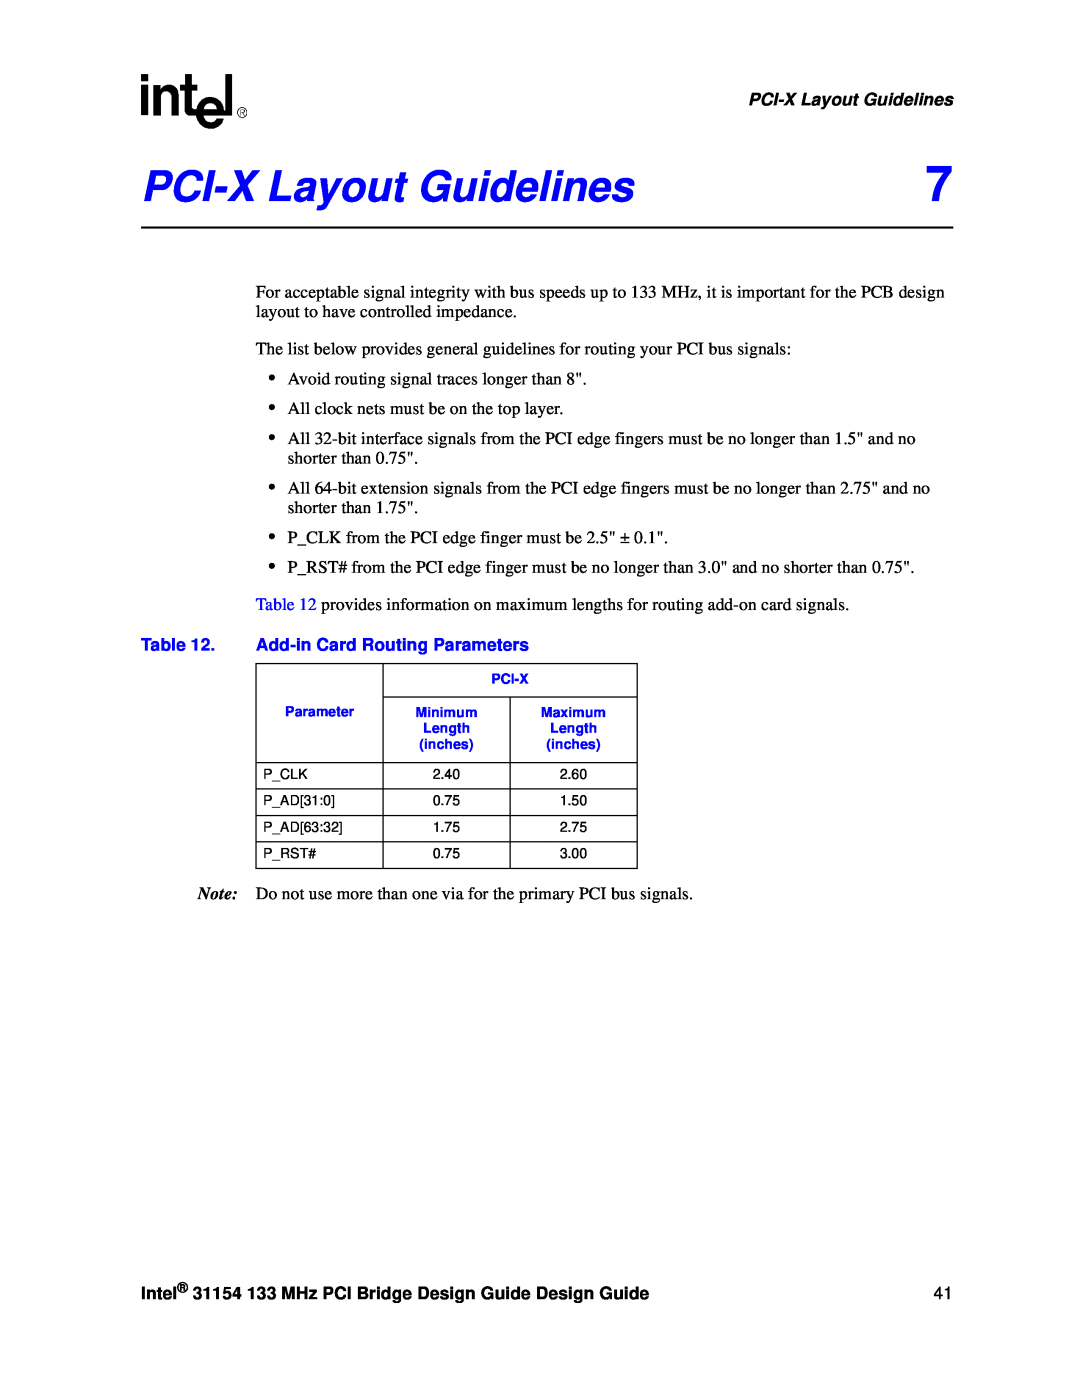 Intel 31154 manual PCI-X Layout Guidelines, Add-in Card Routing Parameters 